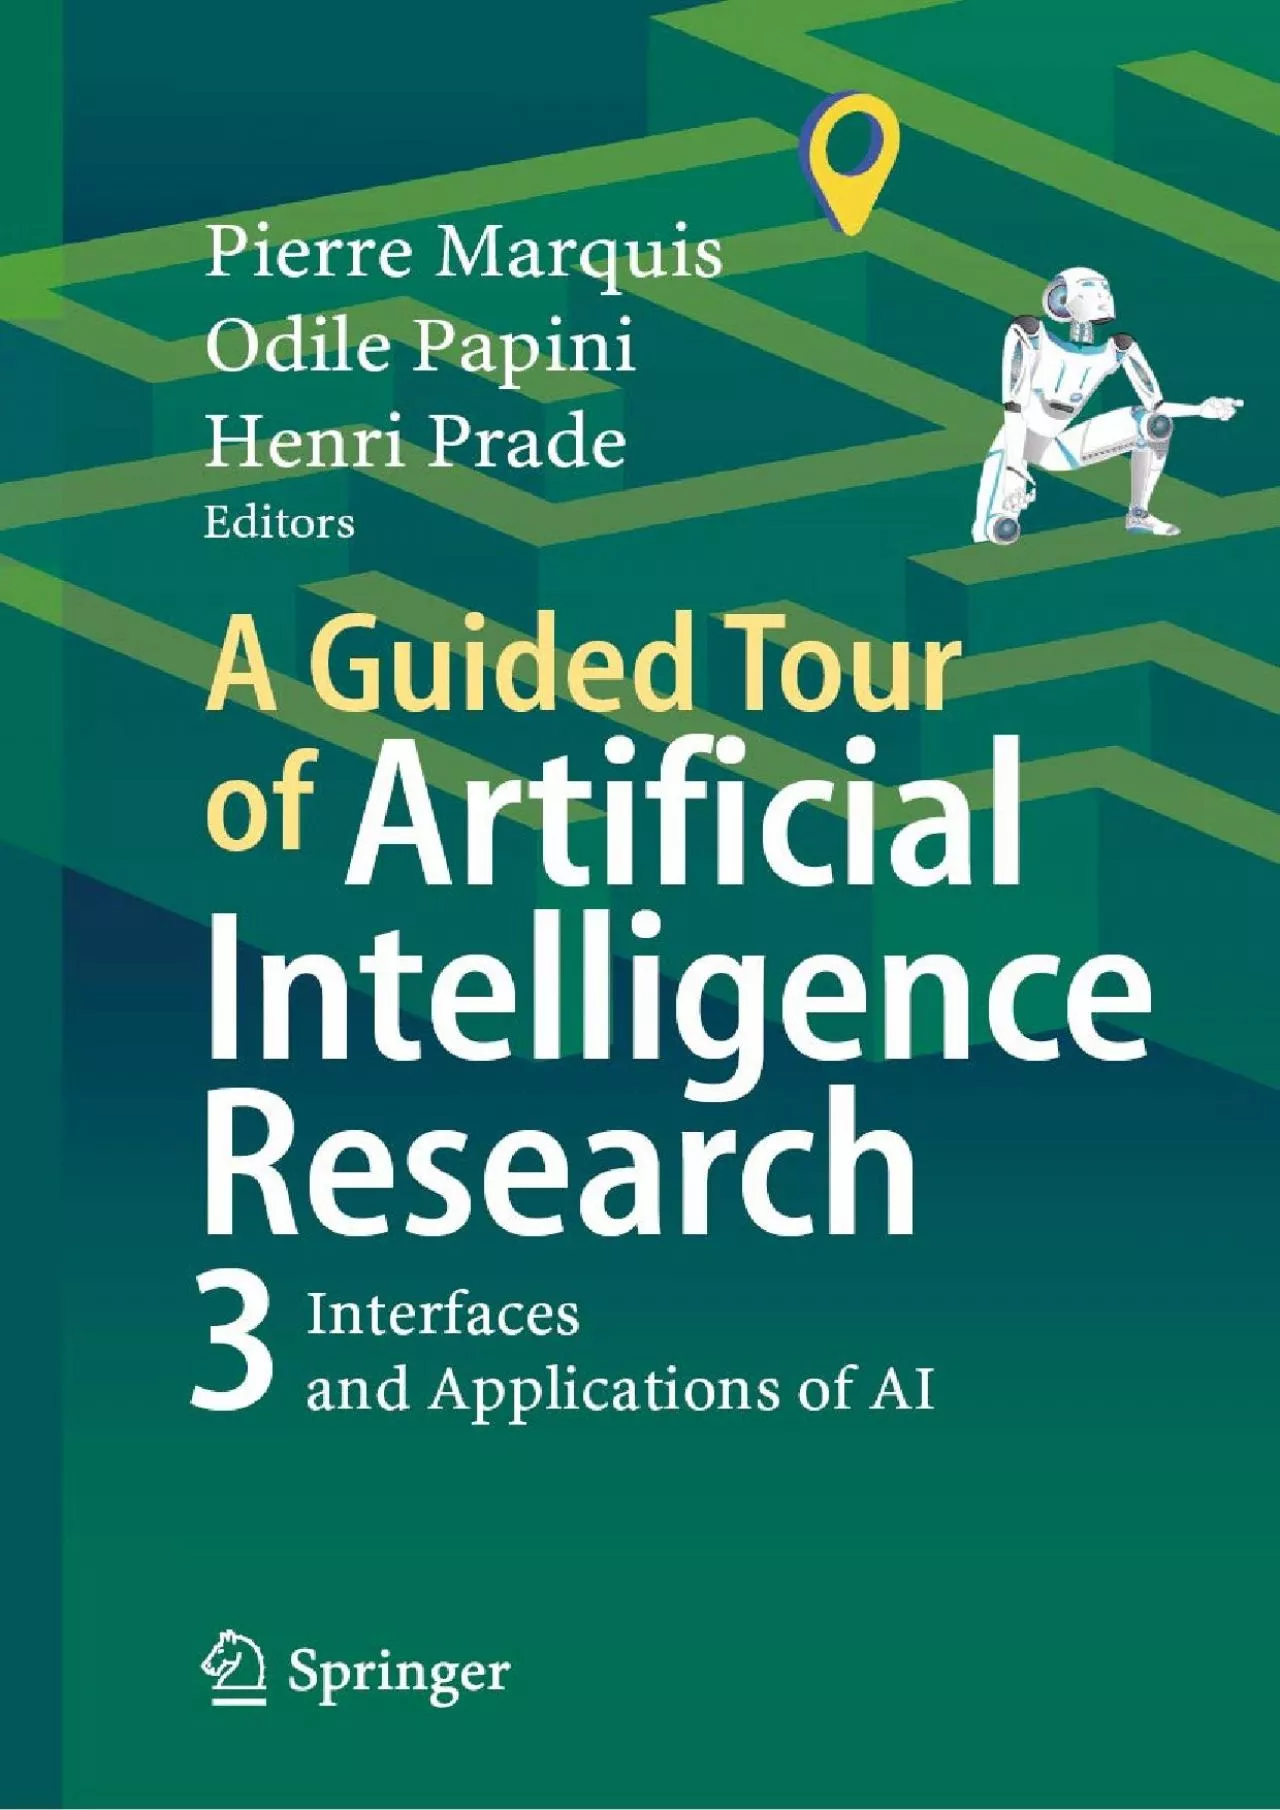 (EBOOK)-A Guided Tour of Artificial Intelligence Research Volume III Interfaces and Applications